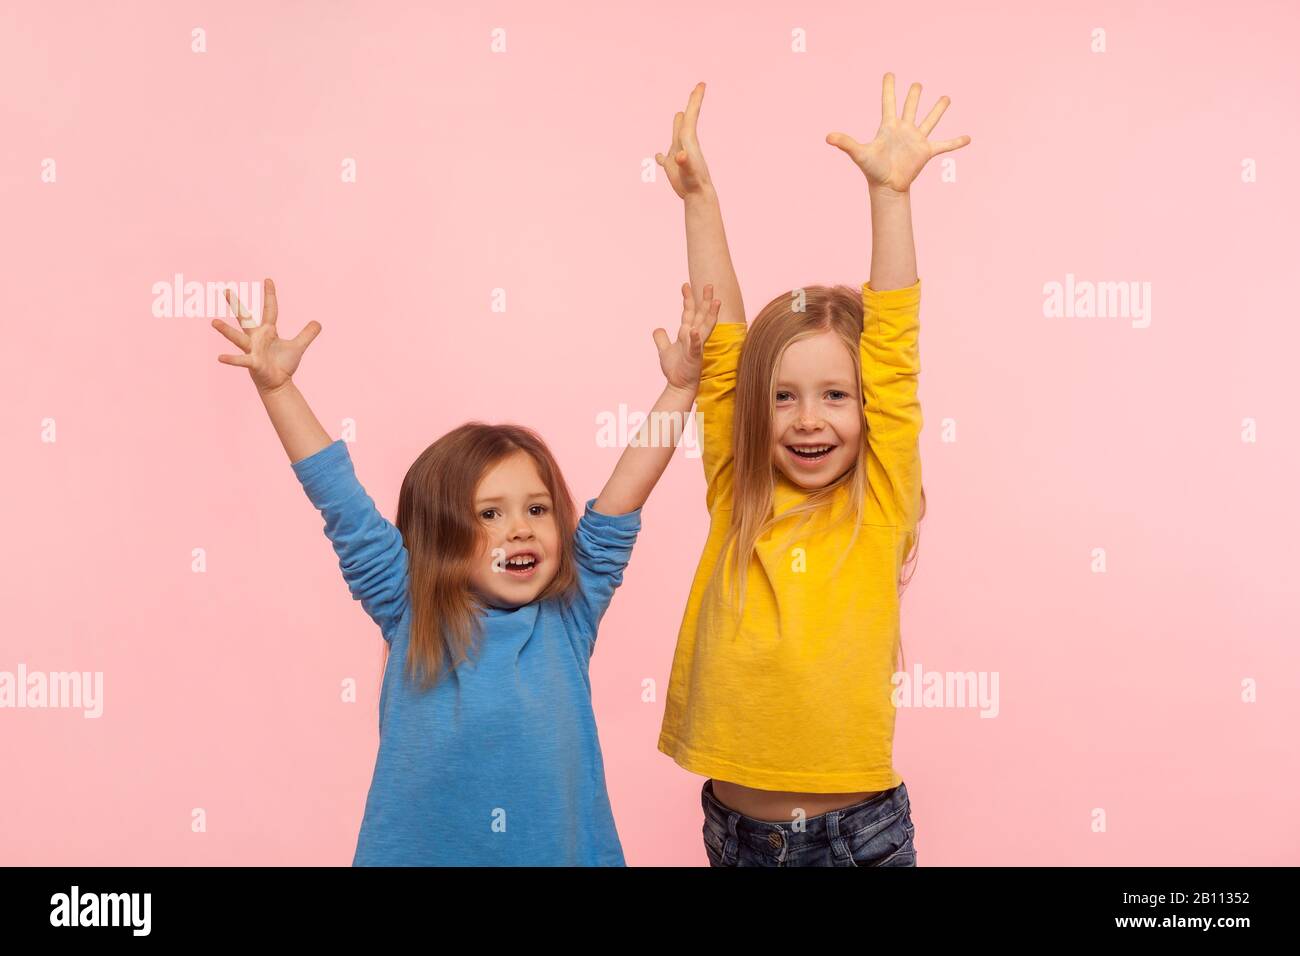 Emotions of happy winners children. Two enthusiastic lively energetic little girls standing with raised hands and screaming for joy, celebrating victo Stock Photo